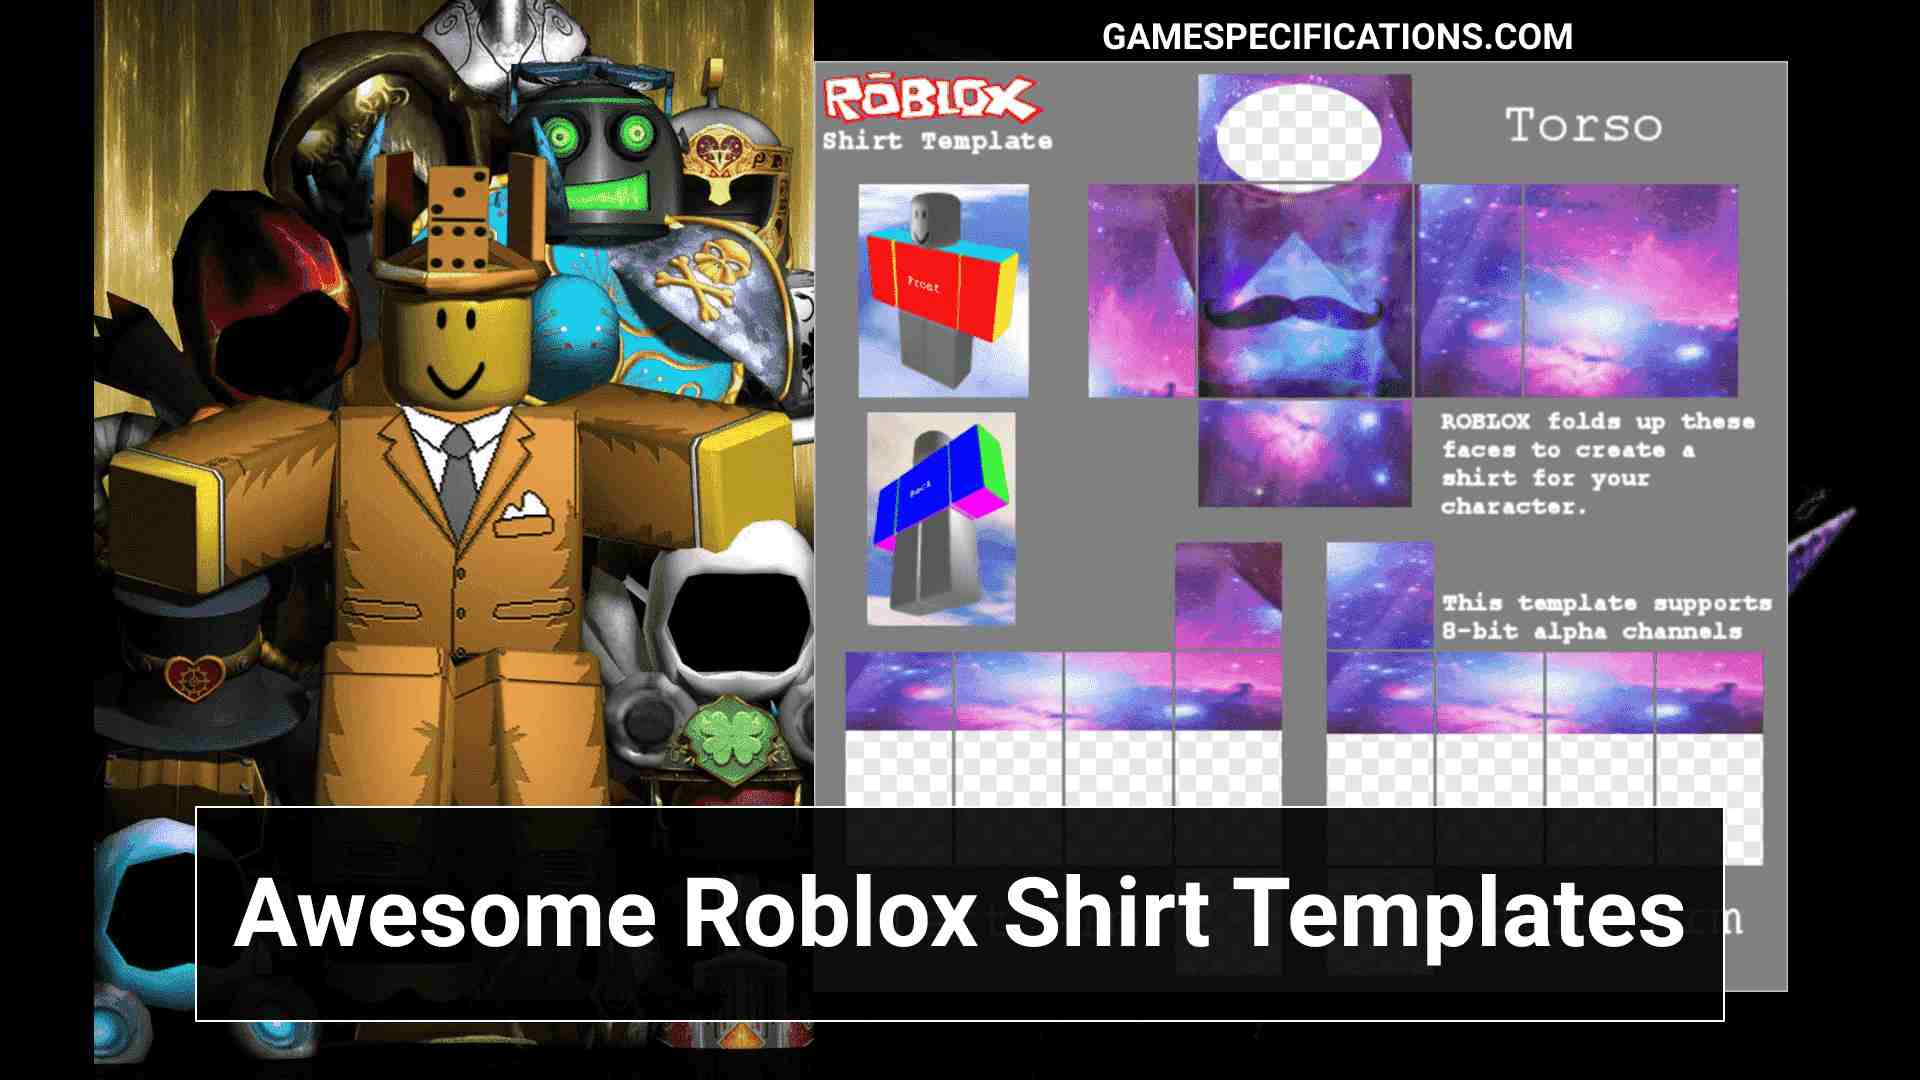 25 Coolest Roblox Shirt Templates Proved To Be The Best Game Specifications - ghost shirt roblox